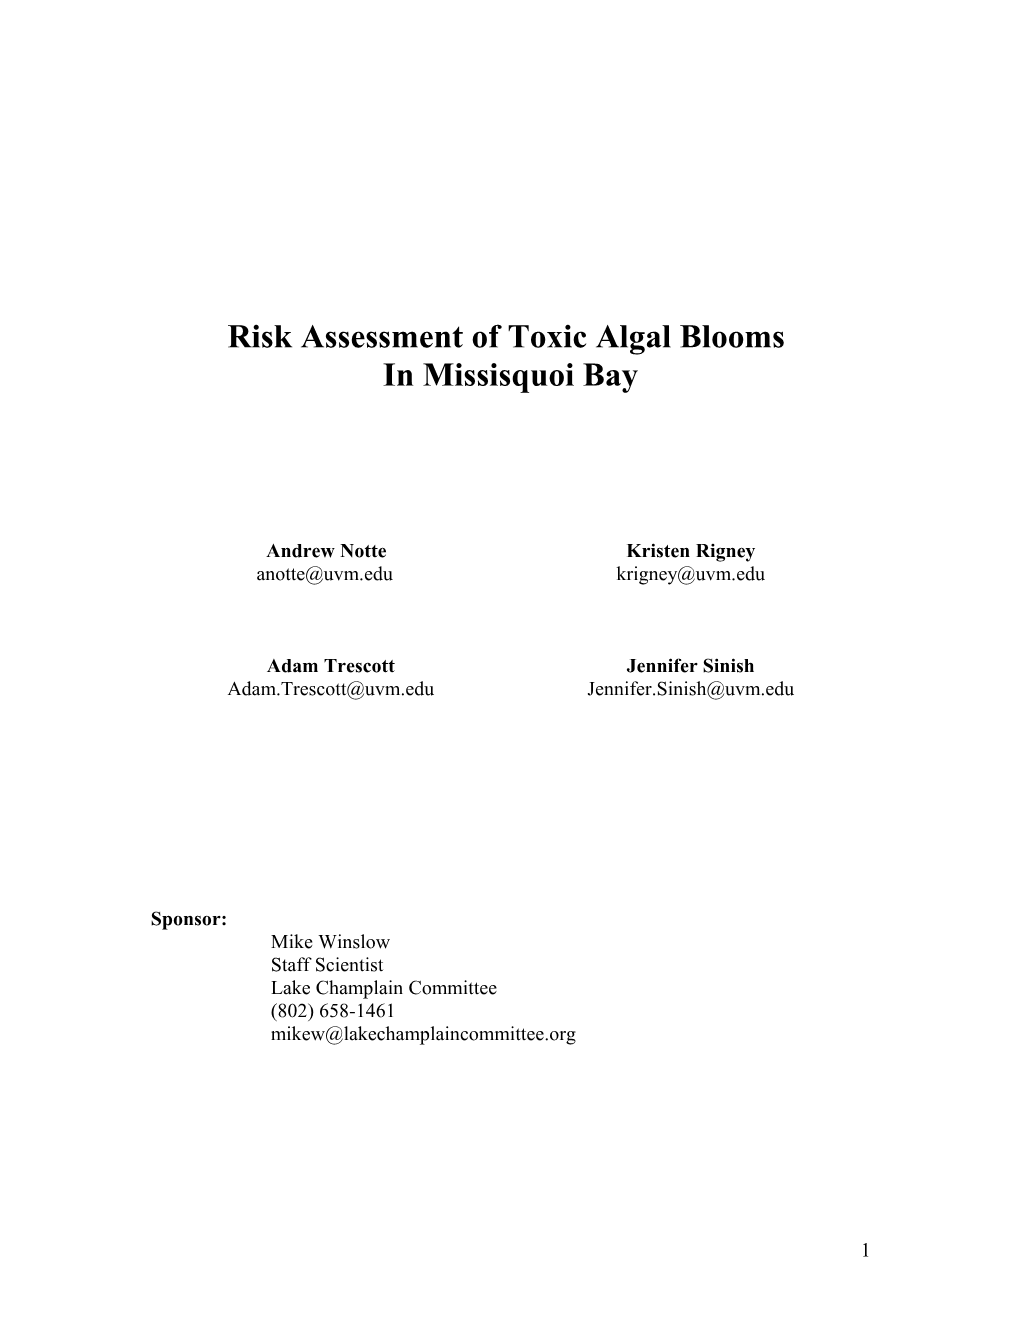 Risk Assessment of Toxic Algal Blooms